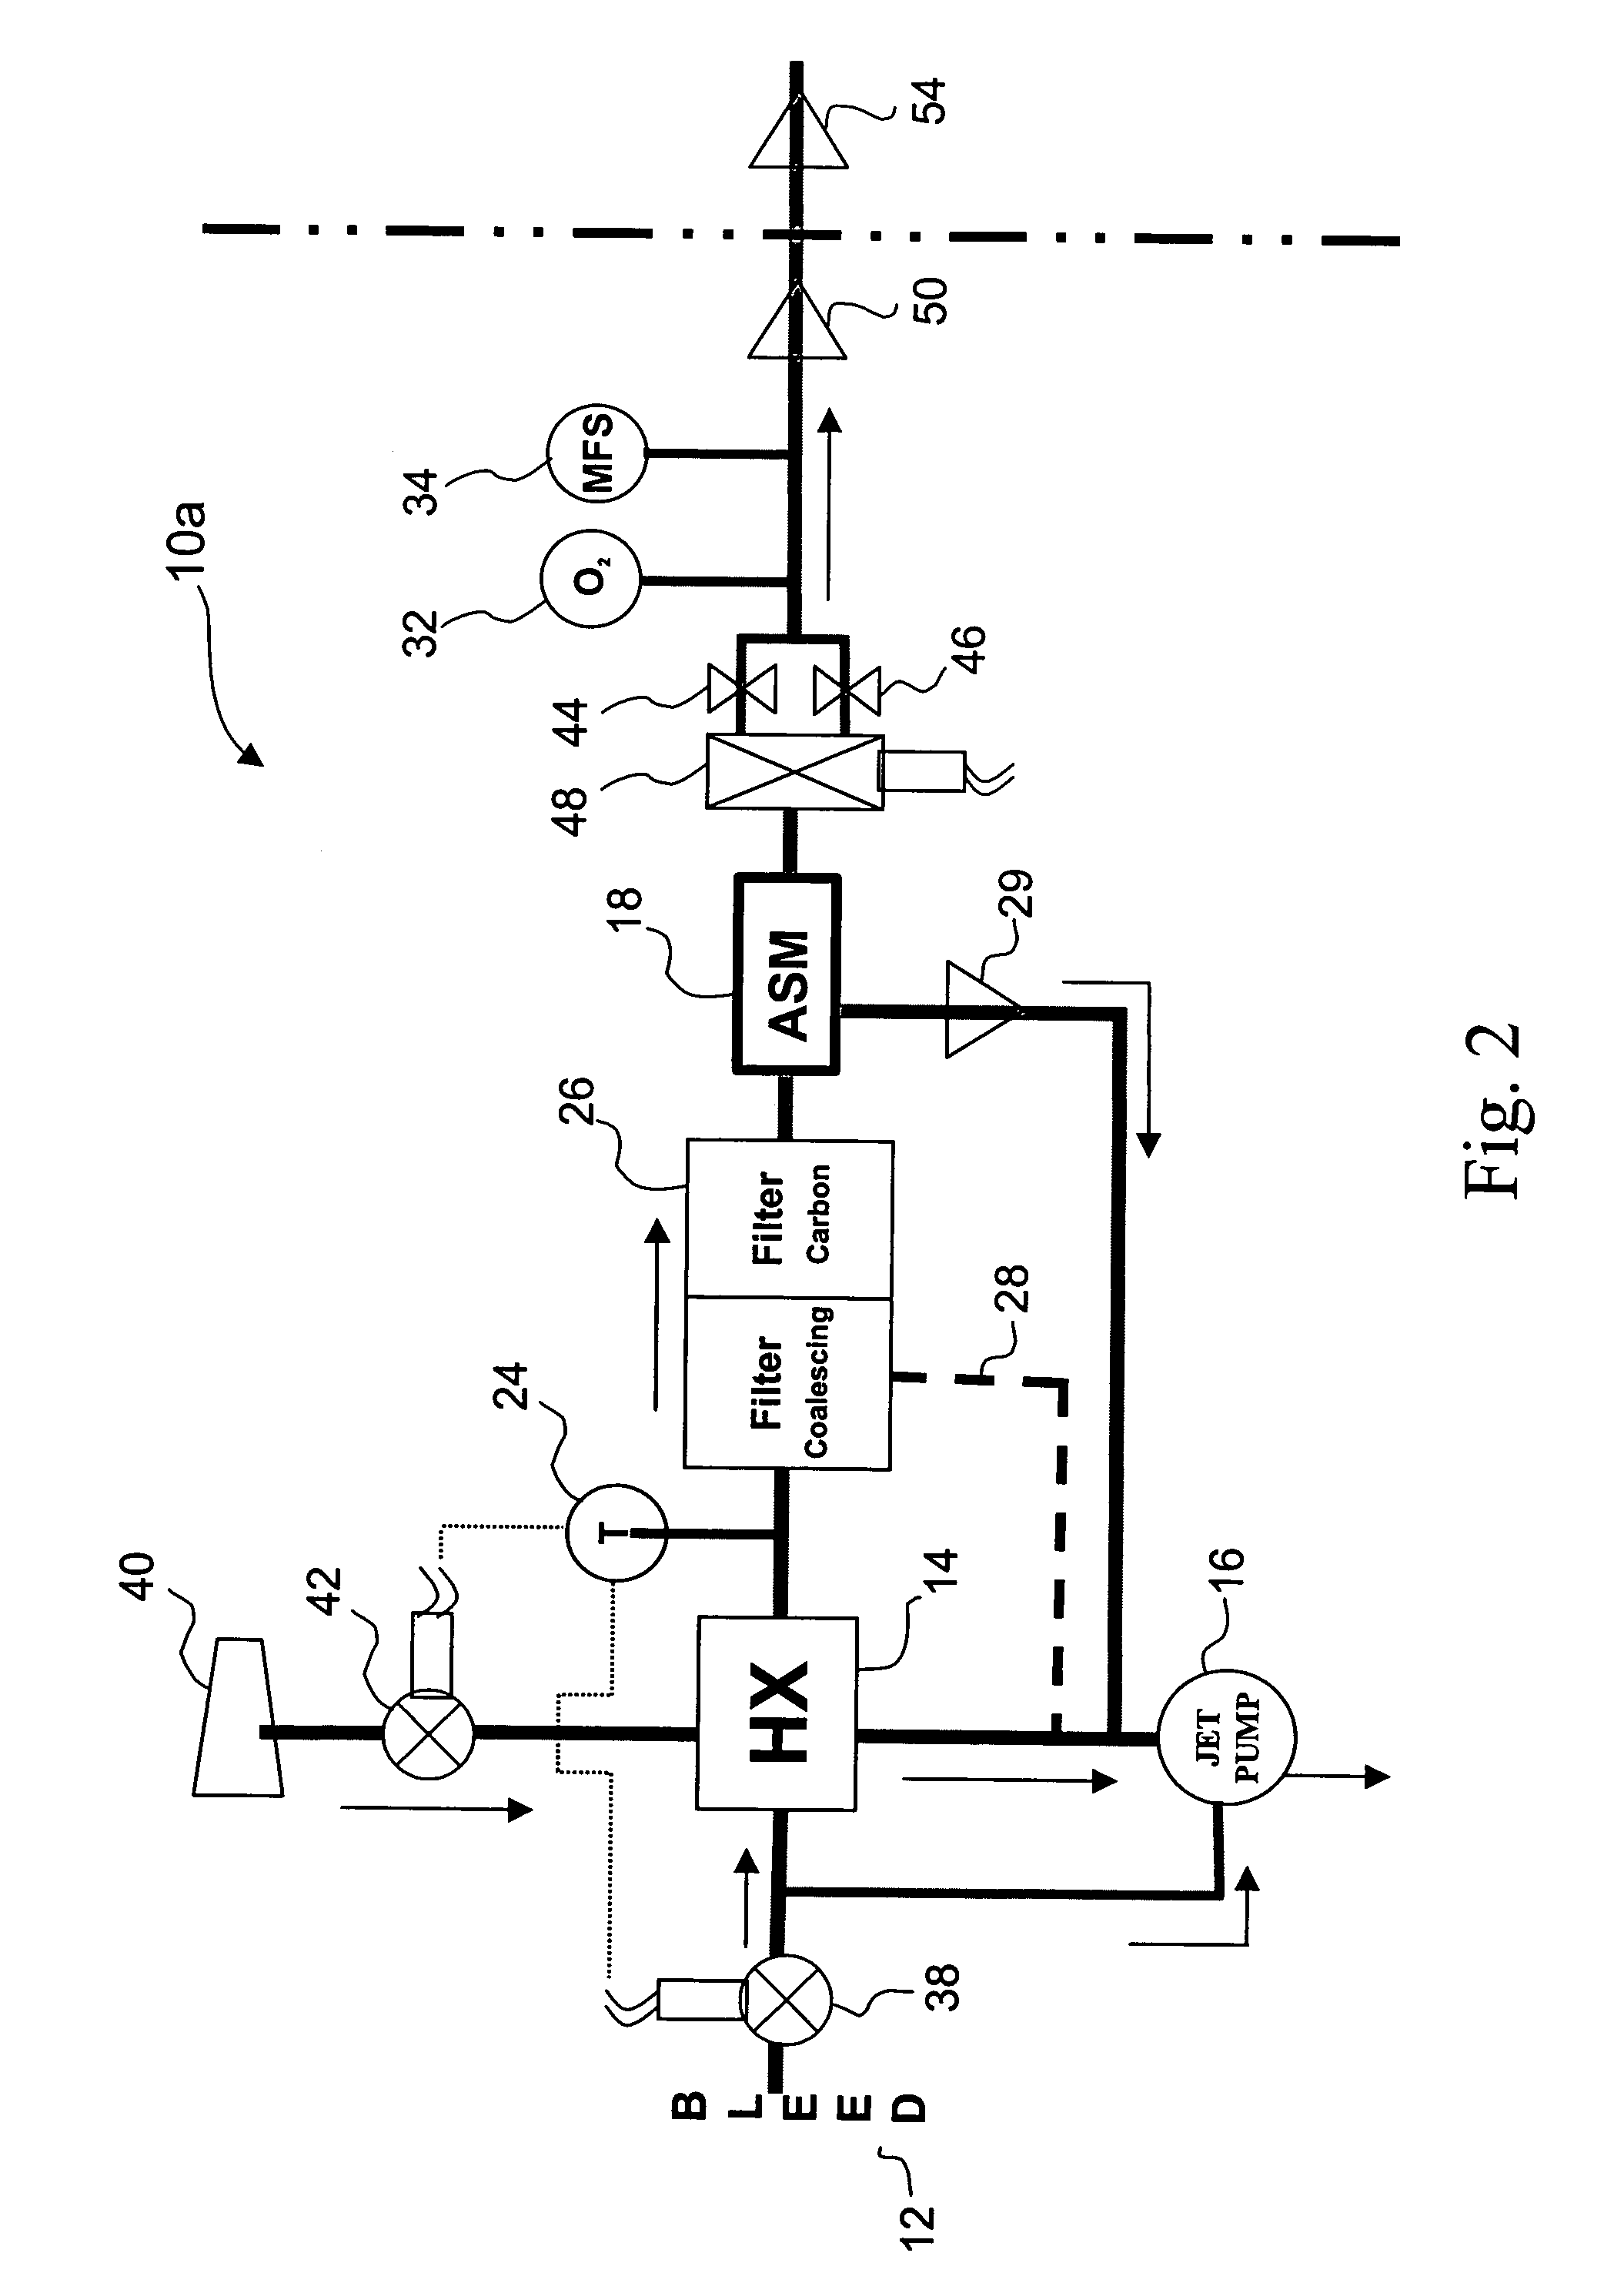 Cooling system for an on-board inert gas generating system